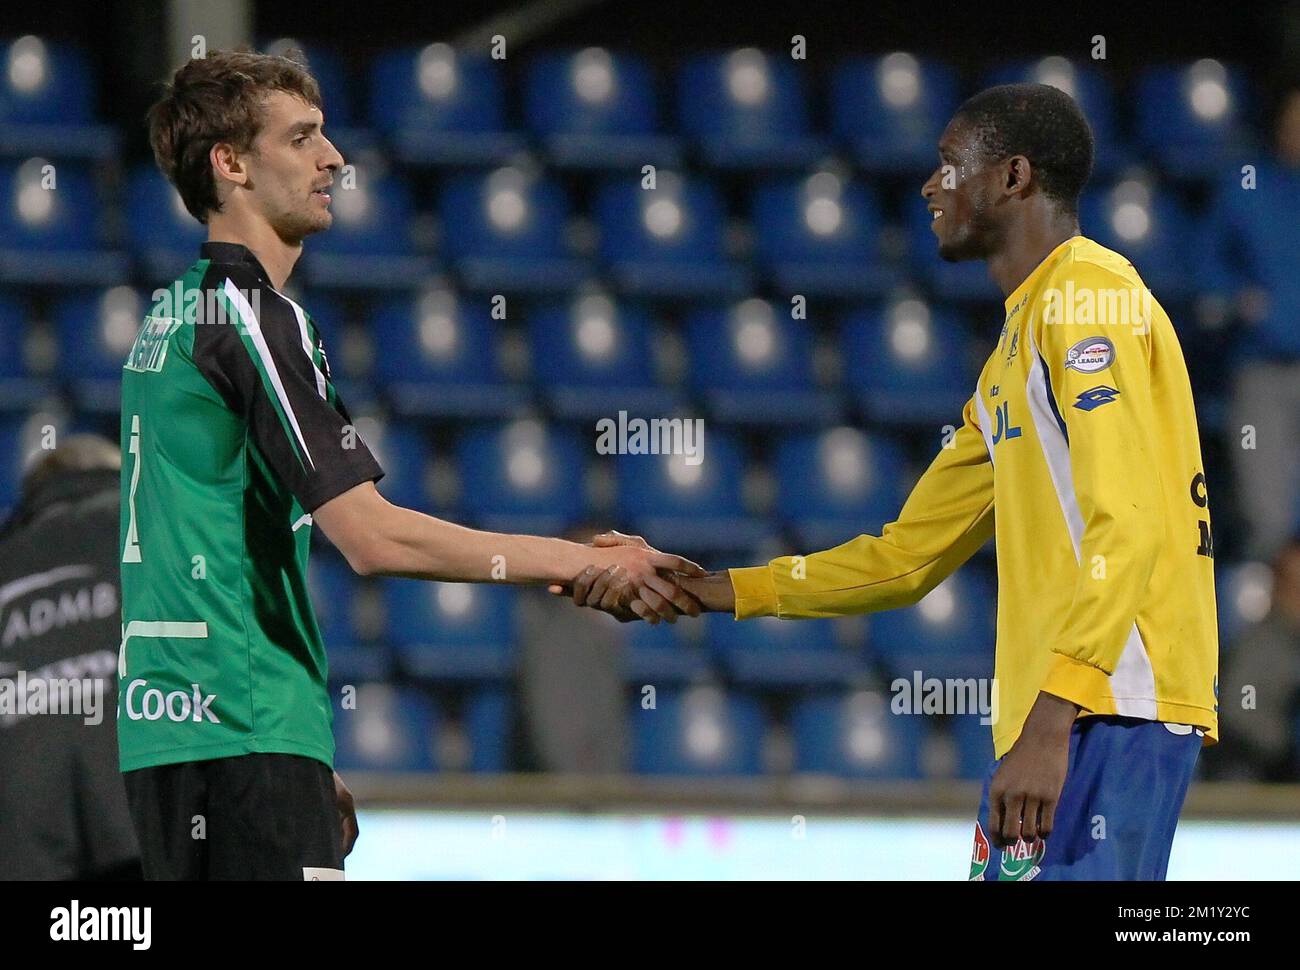 FILE PHOTO: Gregory Mertens has died aged 24 following a cardiac arrest while playing.  Cercle's Gregory Mertens, STVV's Ibrahima Sidibe and shake hands after the draw result 1-1 at the Jupiler Pro League match between Sint-Truiden and Cercle Brugge, in Westerlo, Saturday 09 April 2011, on the second day of the Play-off 2 of Belgian soccer championship. Stock Photo